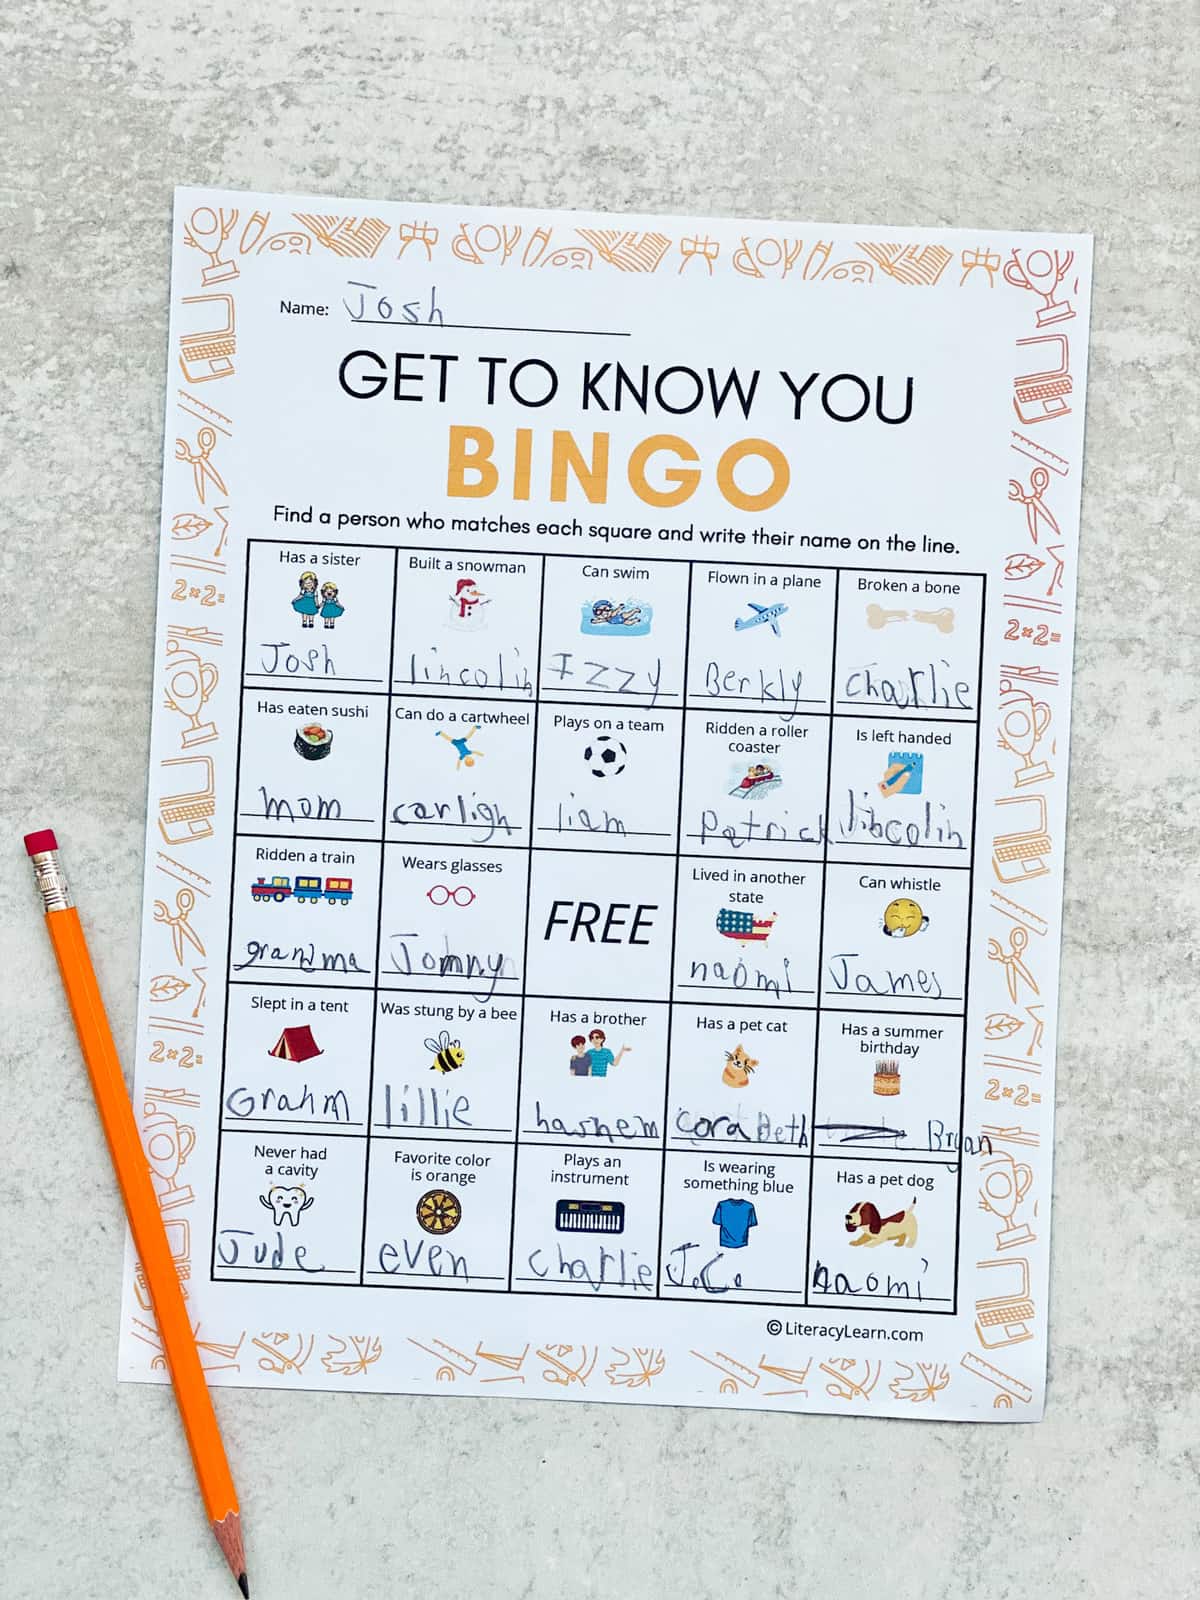 A completed bingo page and pencil, with each box filled in with names.